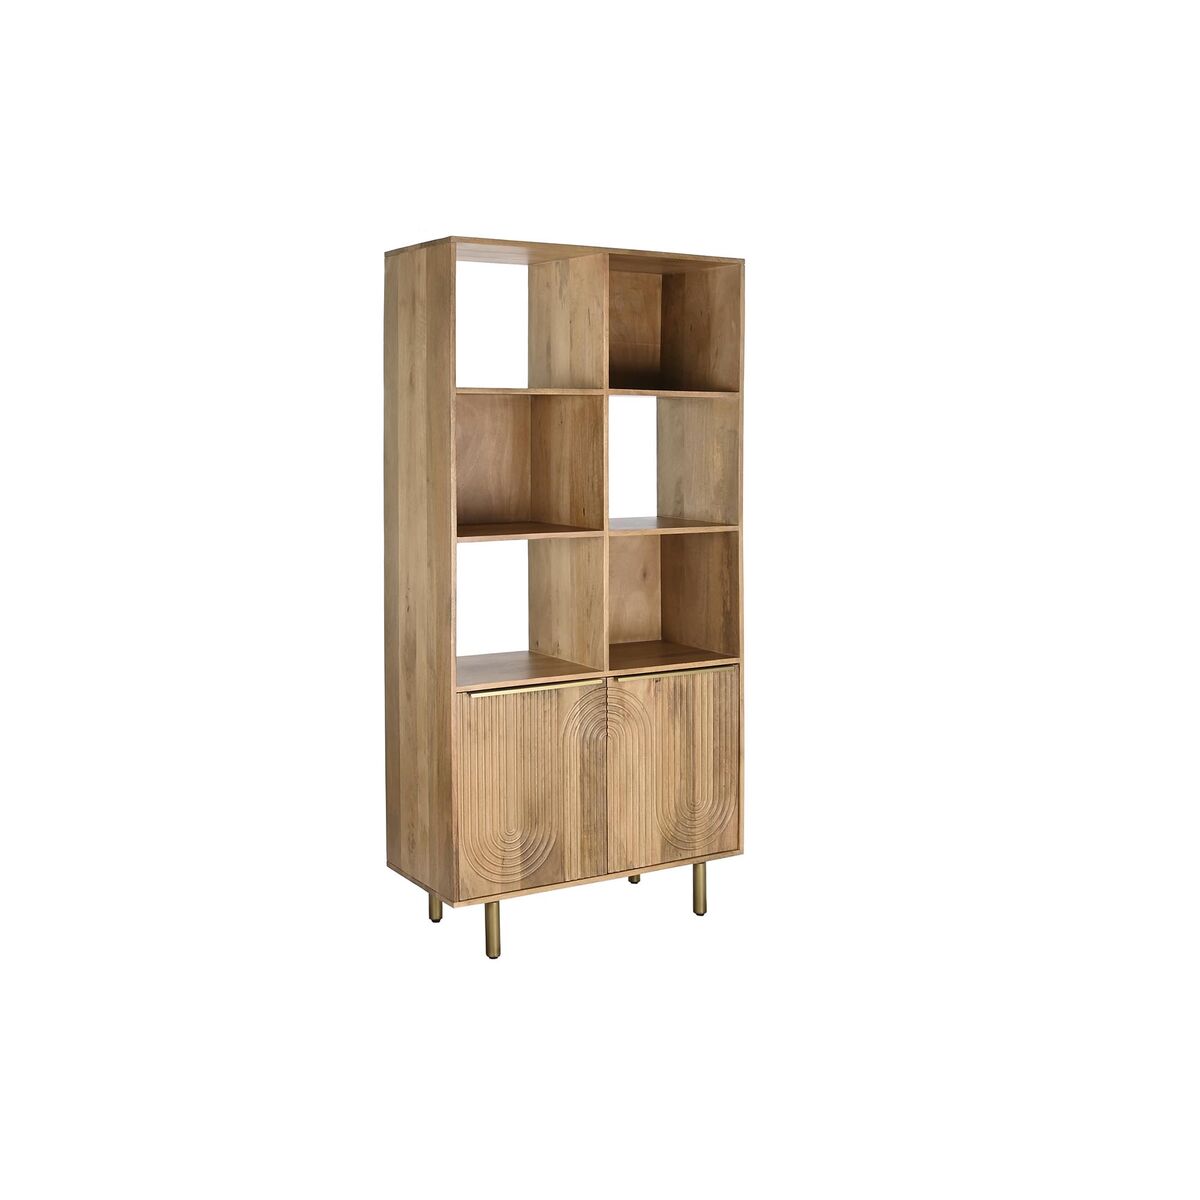 Shelving Unit with Doors in Mango Wood with Golden Legs (90 x 40 x 180 cm)